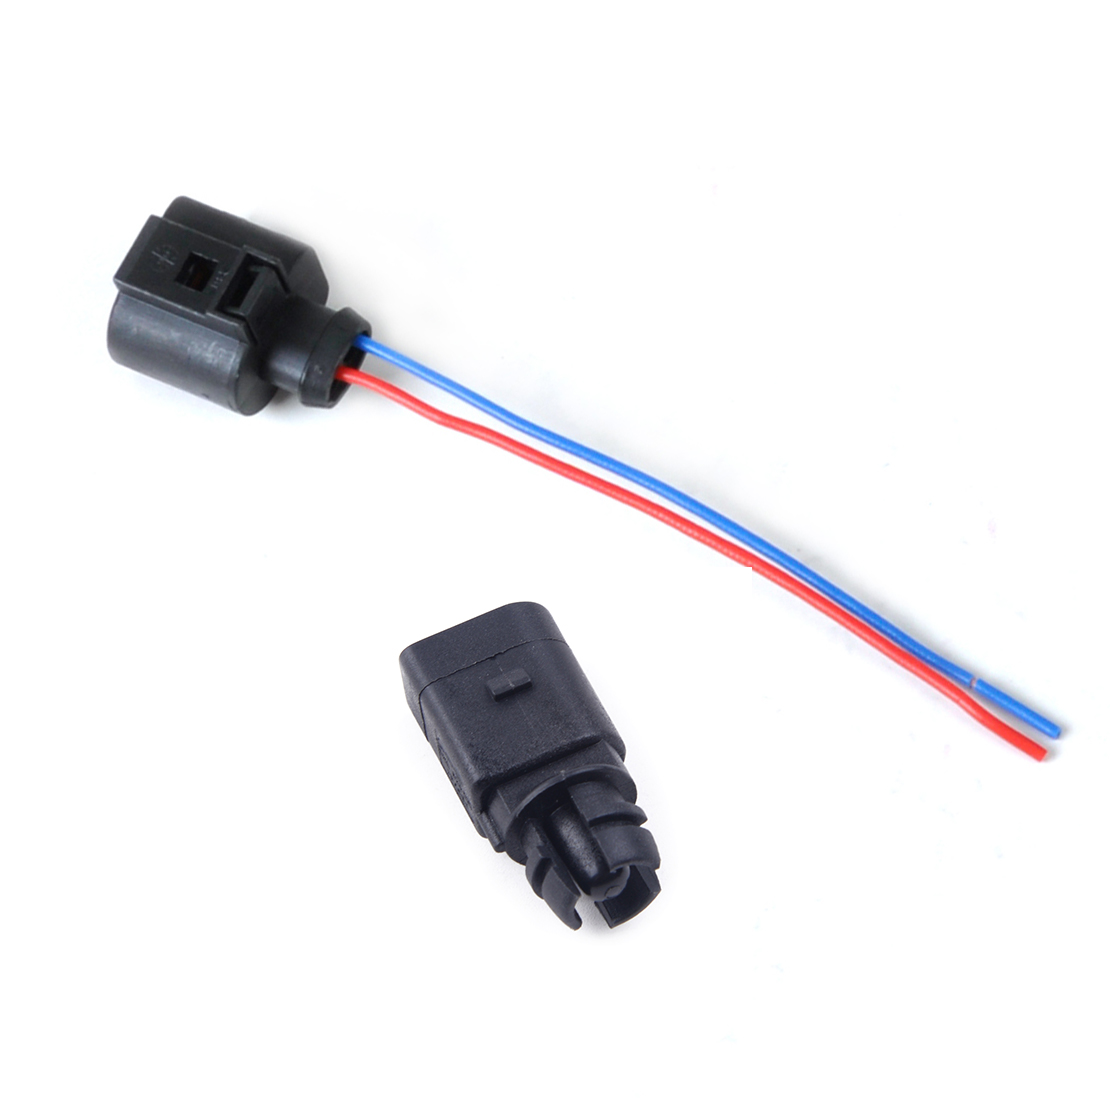 ambient air temperature sensor 2 pin connector plug wiring harness fit for audi ebay details about ambient air temperature sensor 2 pin connector plug wiring harness fit for audi